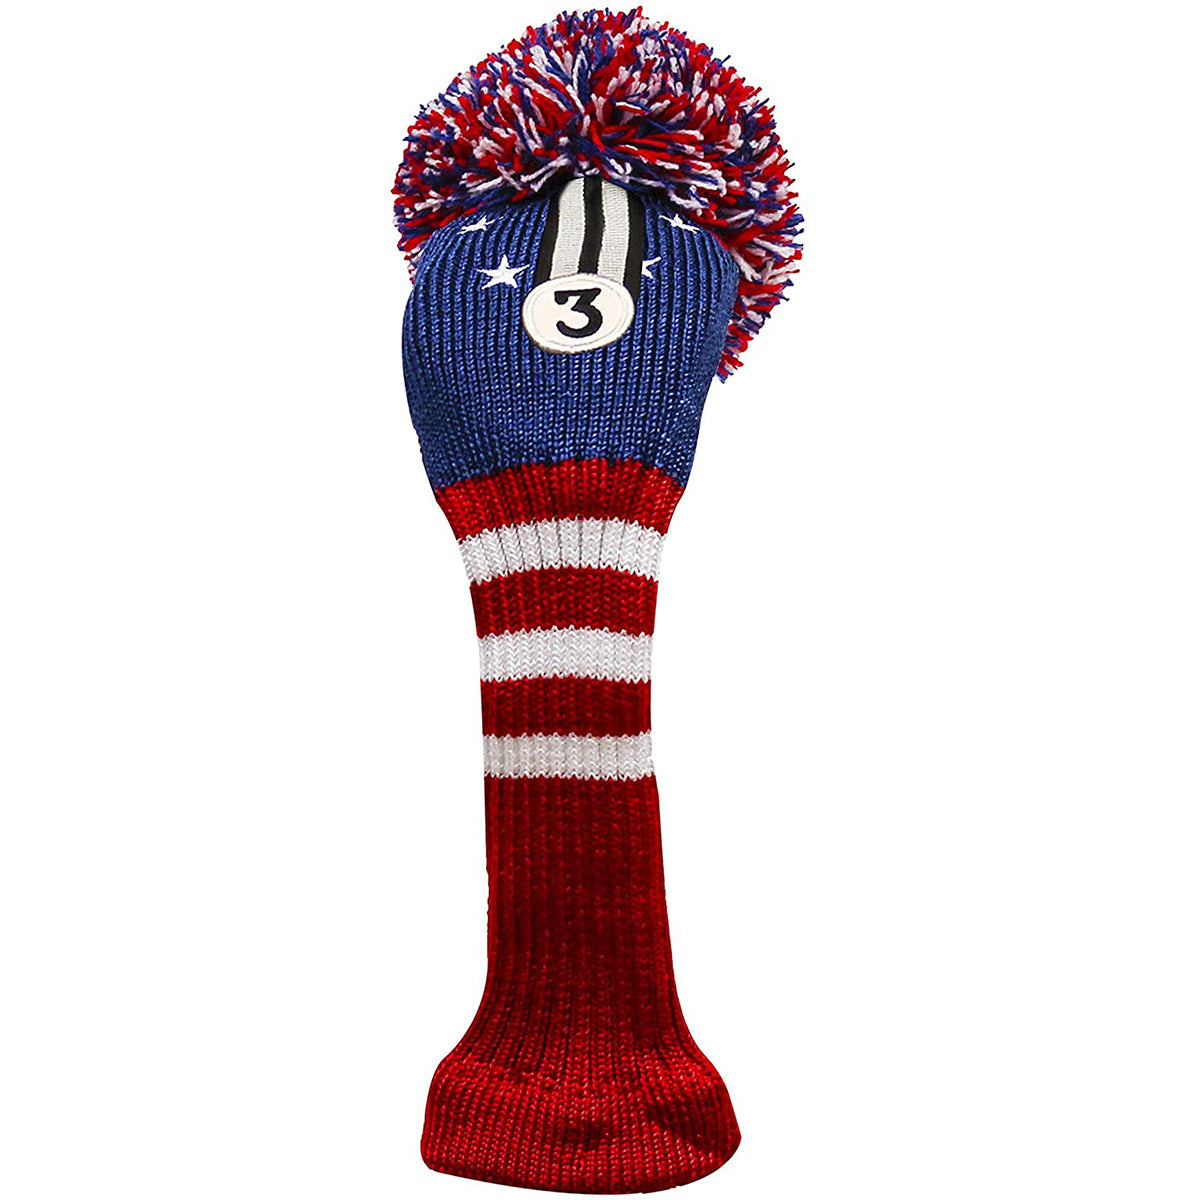 IZZO Vintage Knitted Golf Club Headcover - Red/White/Blue IZZO Golf